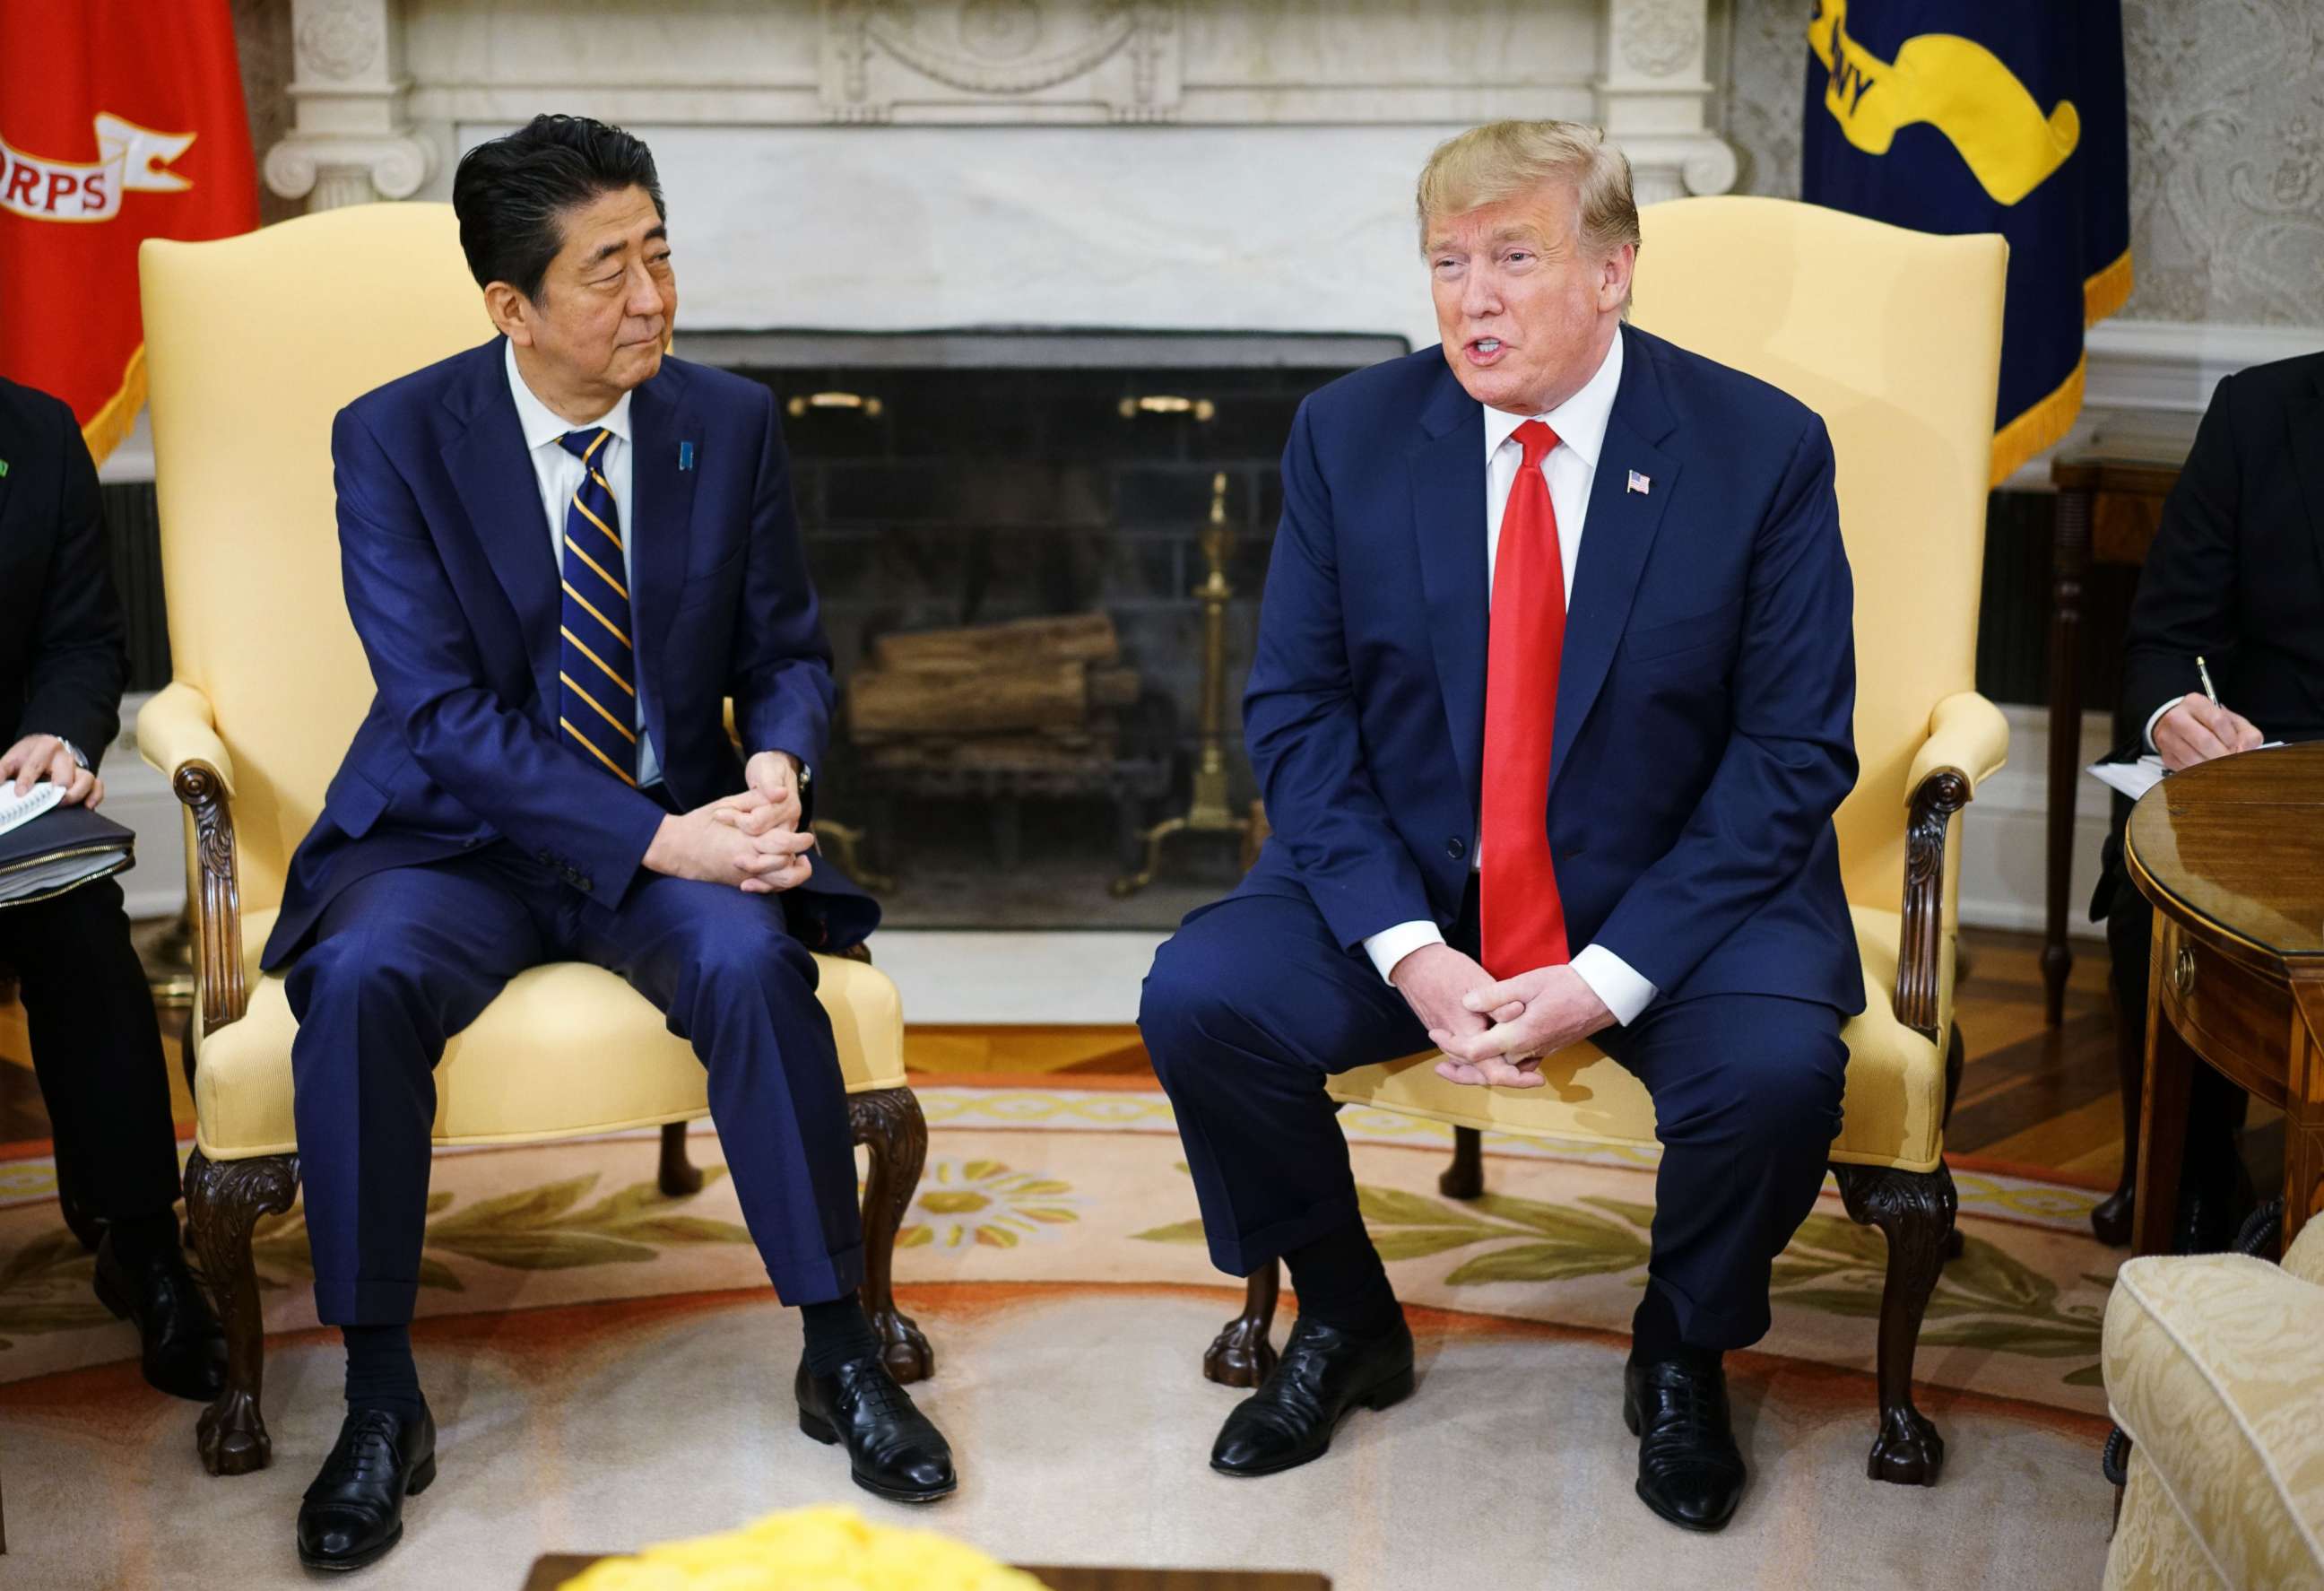 PHOTO: President Donald Trump takes part in a bilateral meeting with Japan's Prime Minister Shinzo Abe in the Oval Office of the White House in Washington, D.C. in this April 26, 2019 file photo.